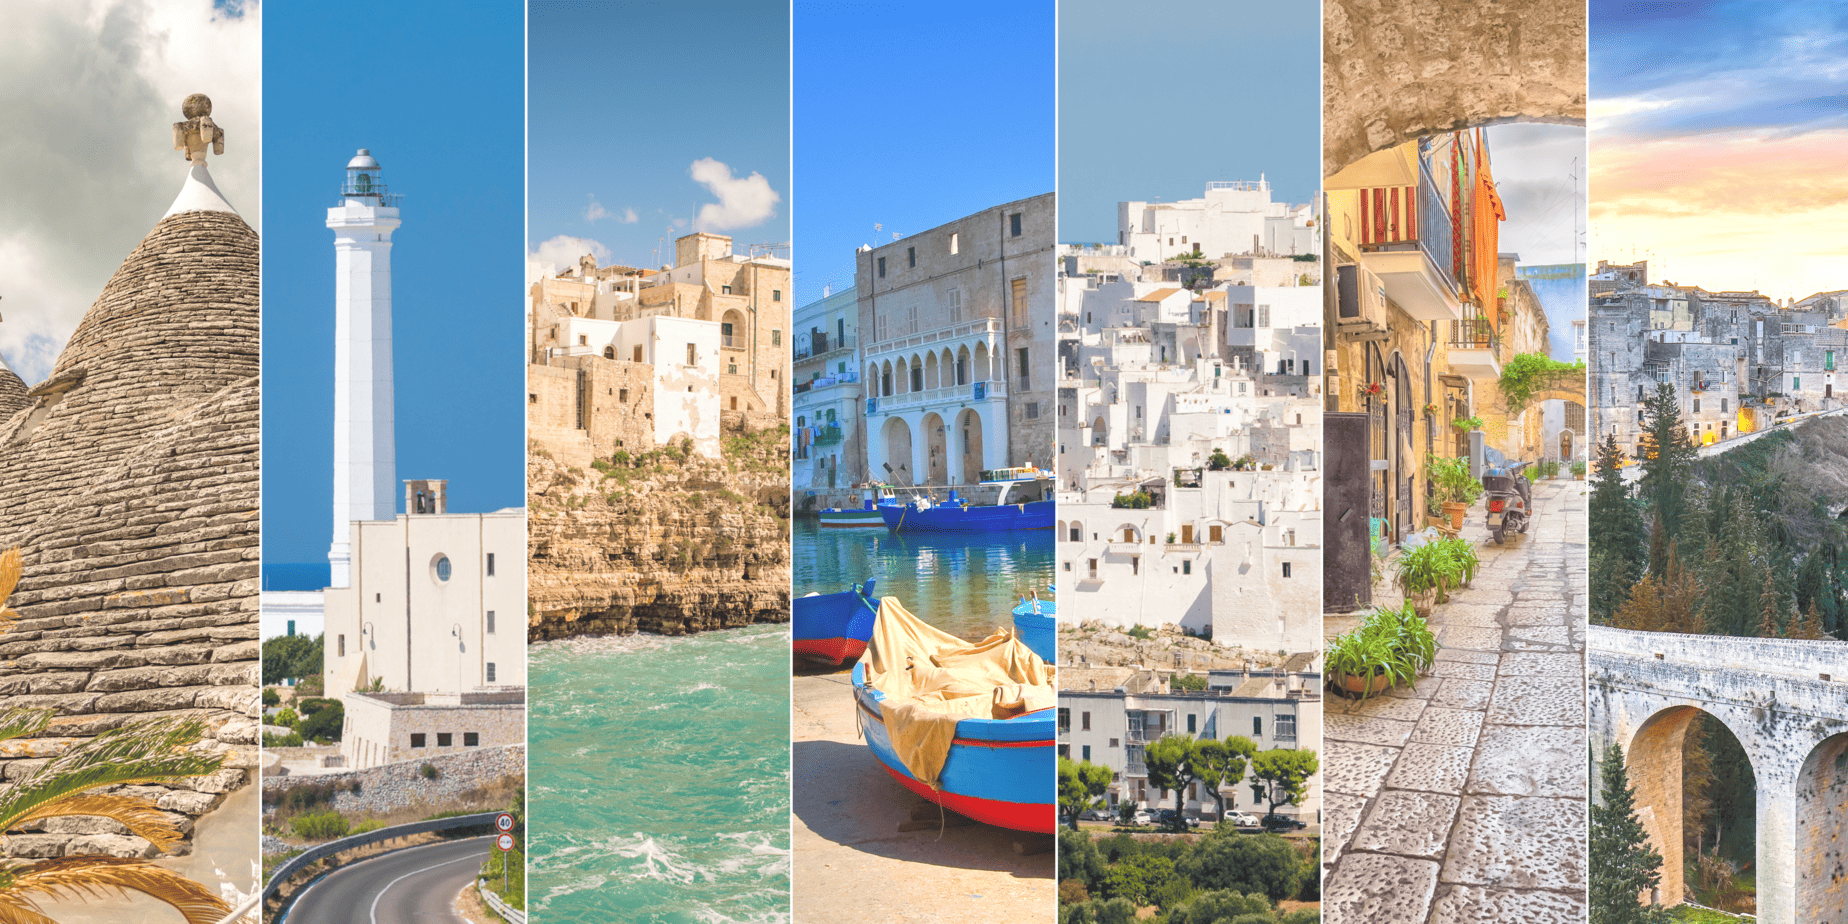 A series of photos from the Road Trip Puglia article